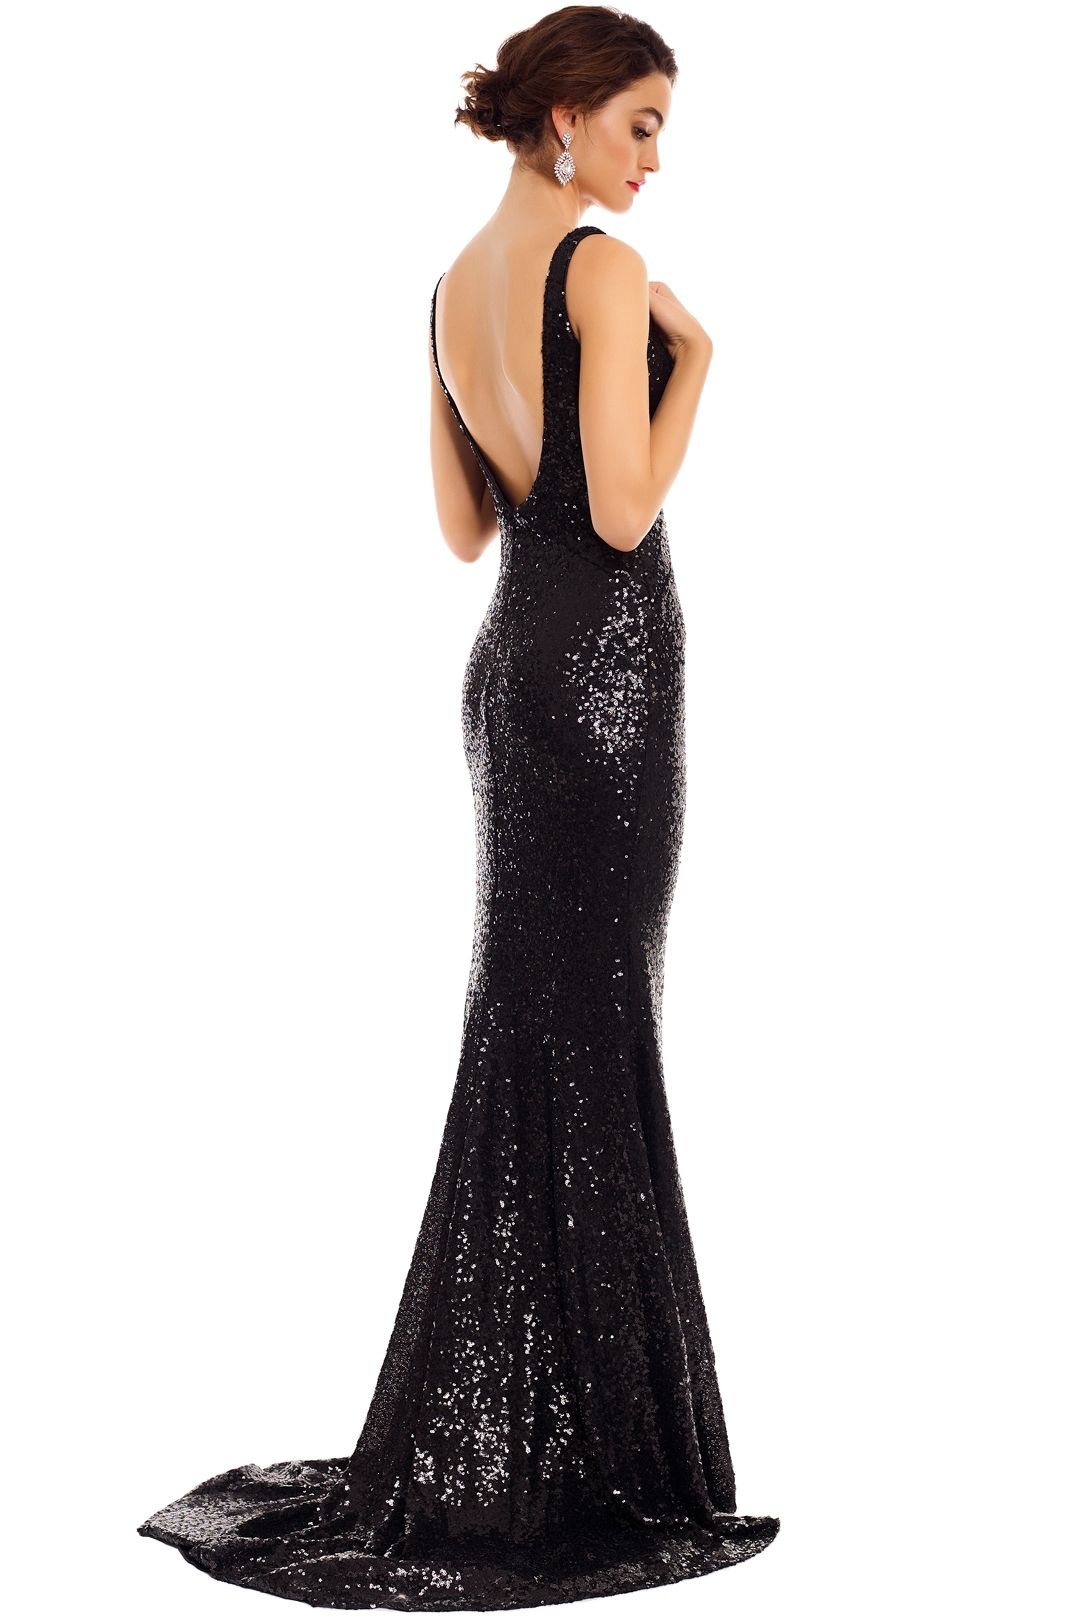 Tinaholy - Annalise Sequin Gown - Black - Back